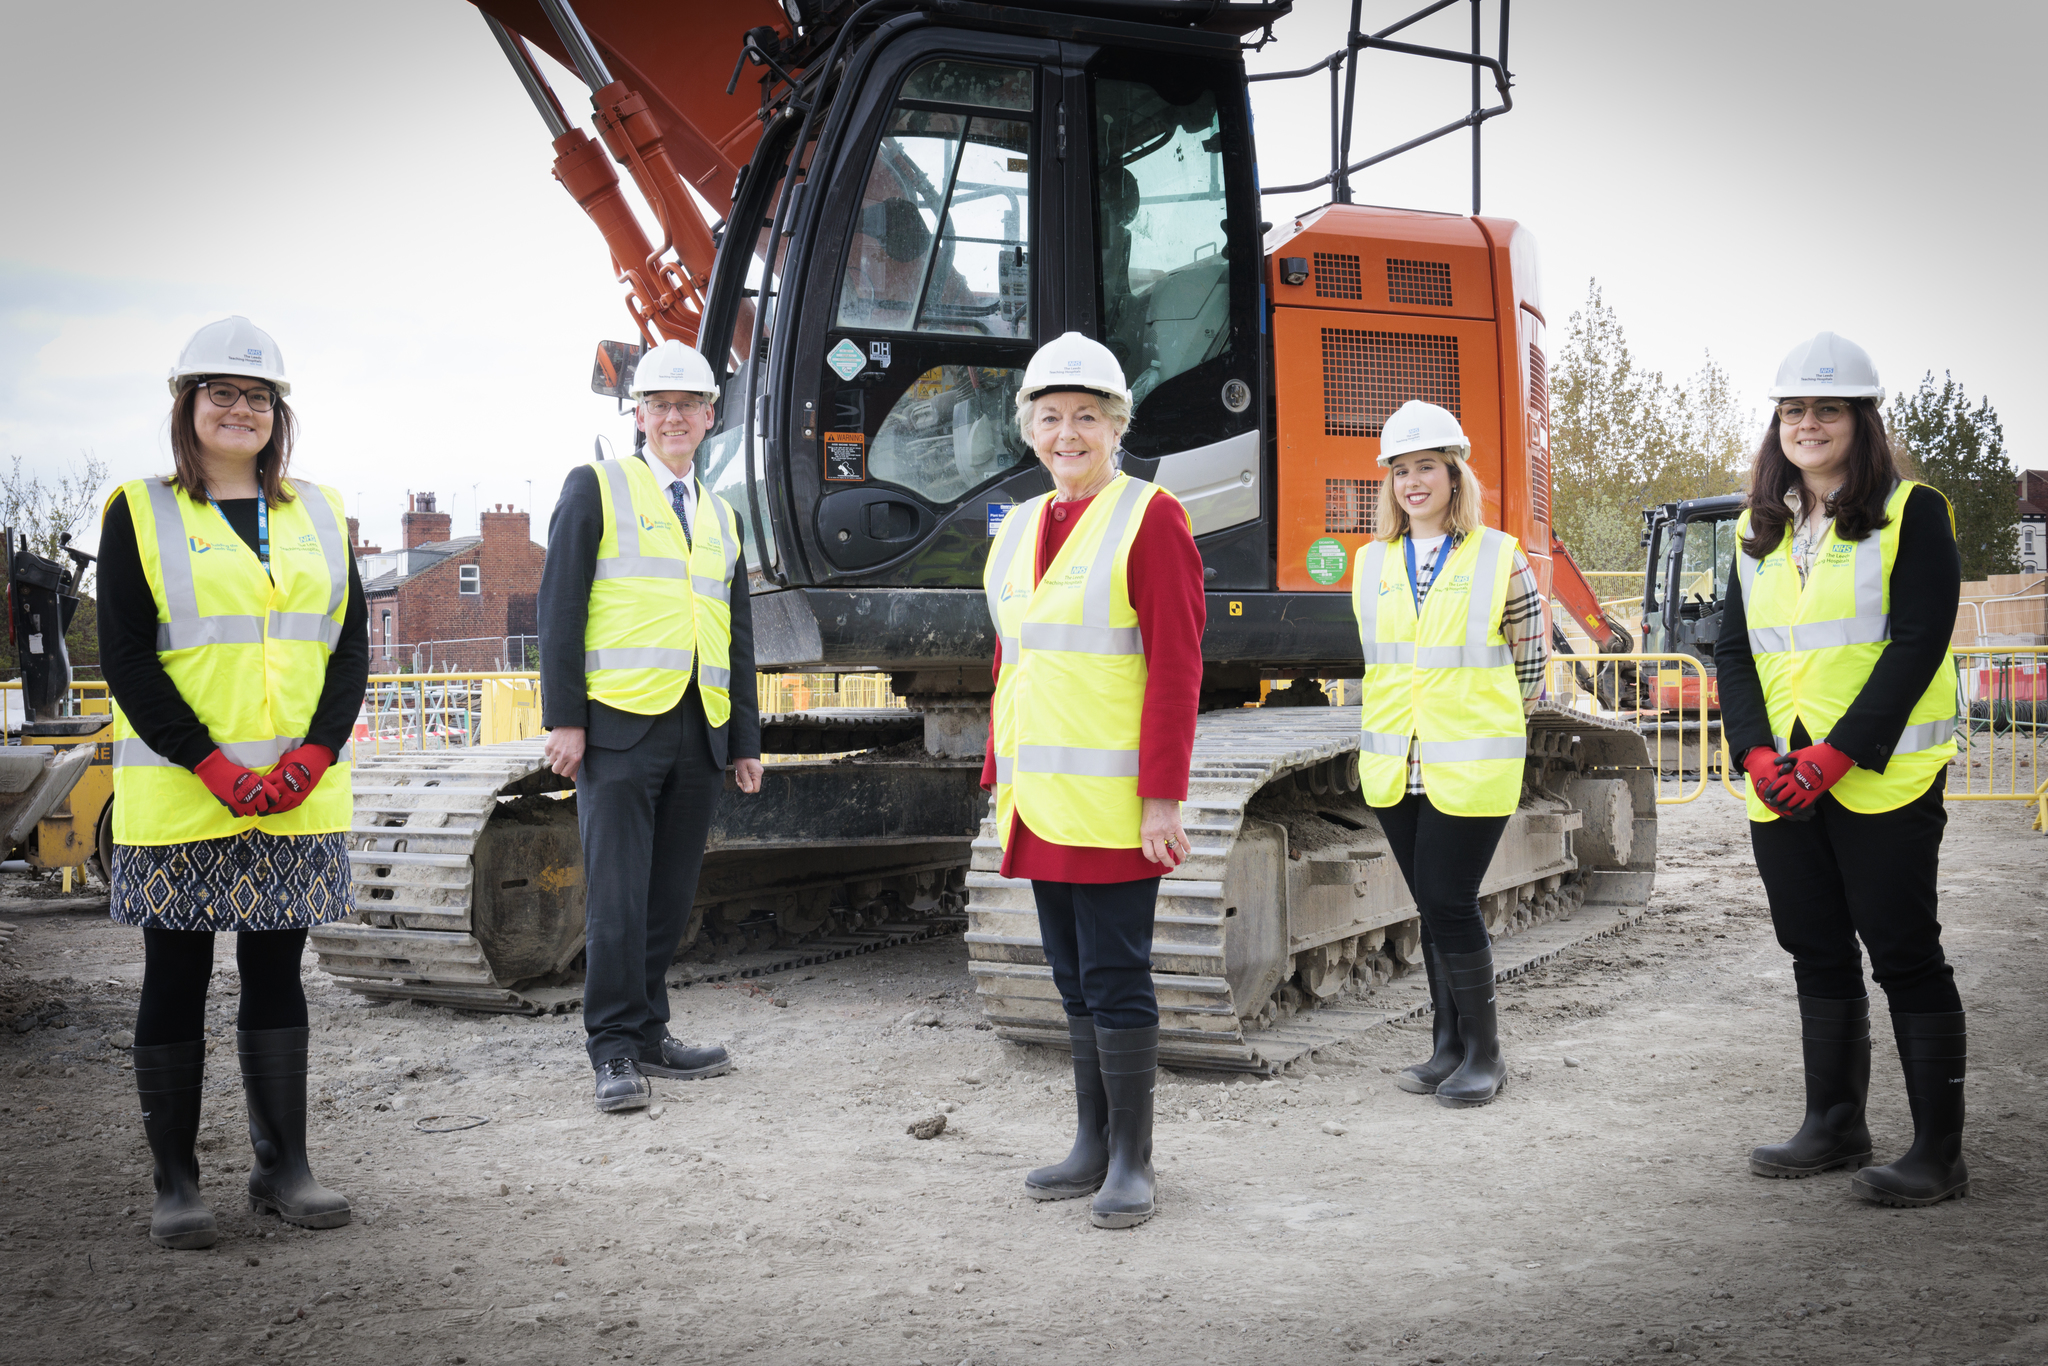 New pathology laboratory for Leeds, West Yorkshire and Harrogate gets under way